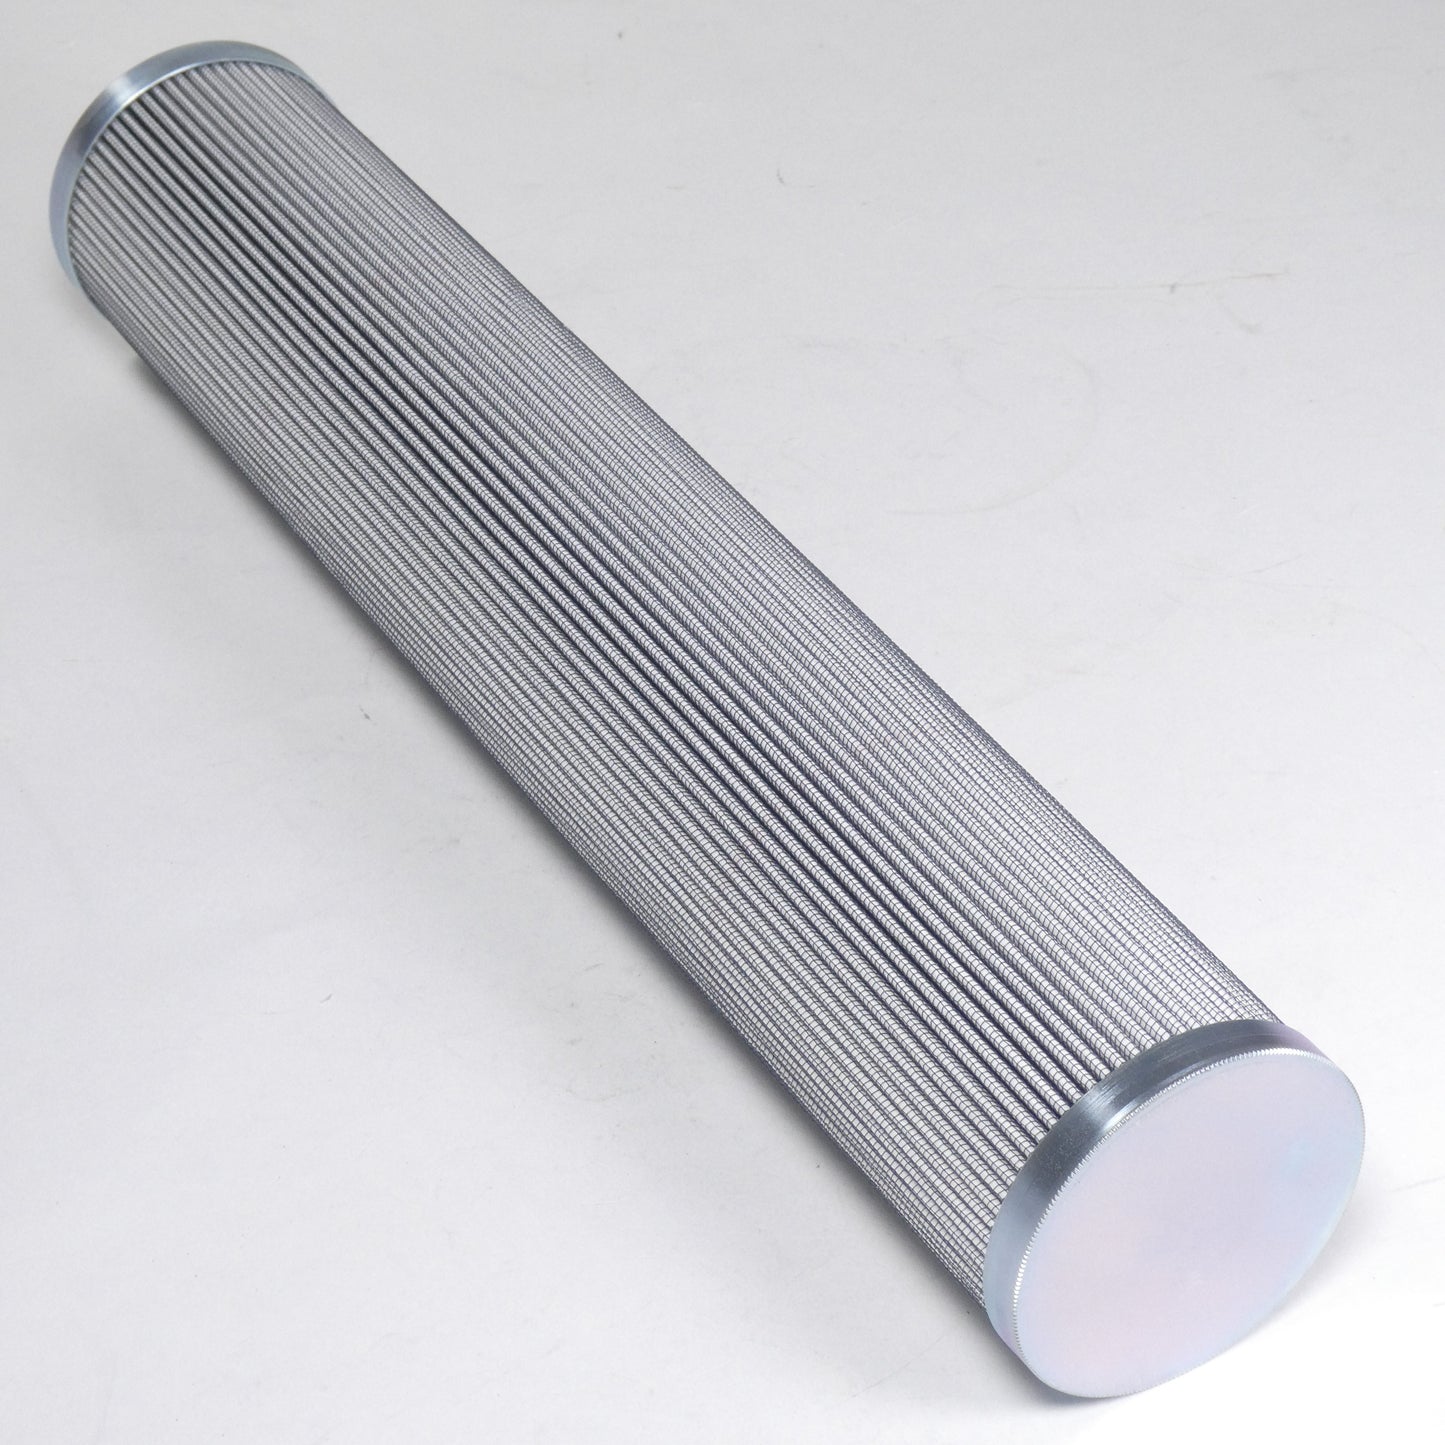 Hydrafil Replacement Filter Element for Pall HC9601FDP16ZA